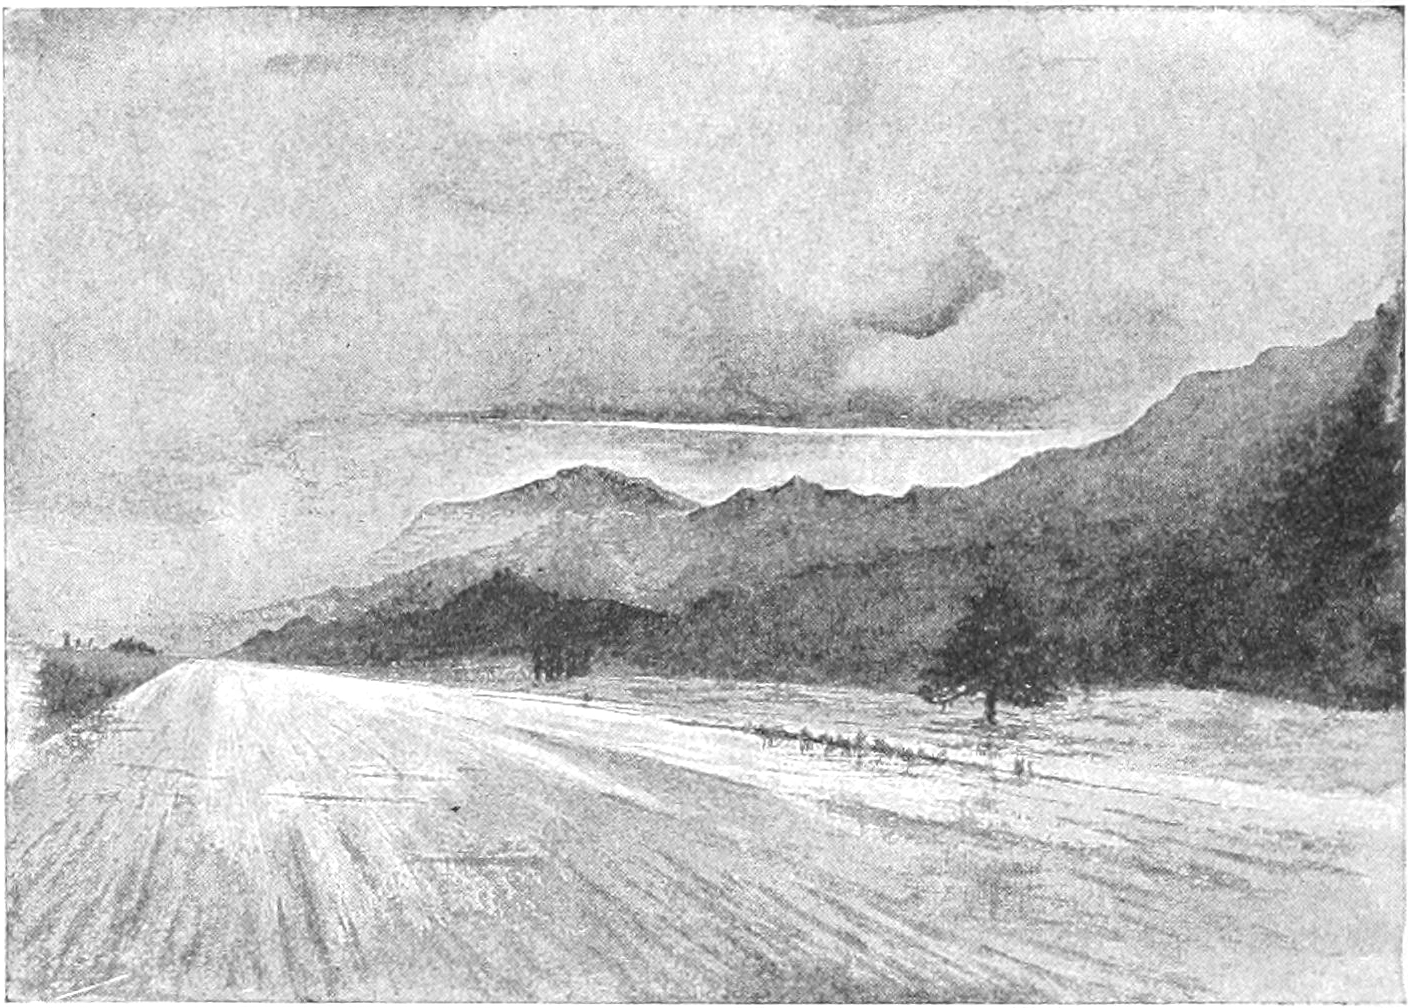 Sketch of a broad, flat road, with hills to the right and the sky above. A few trees are drawn along the right side of the road. The road has lighter areas of shading, which make it look like it is wet.